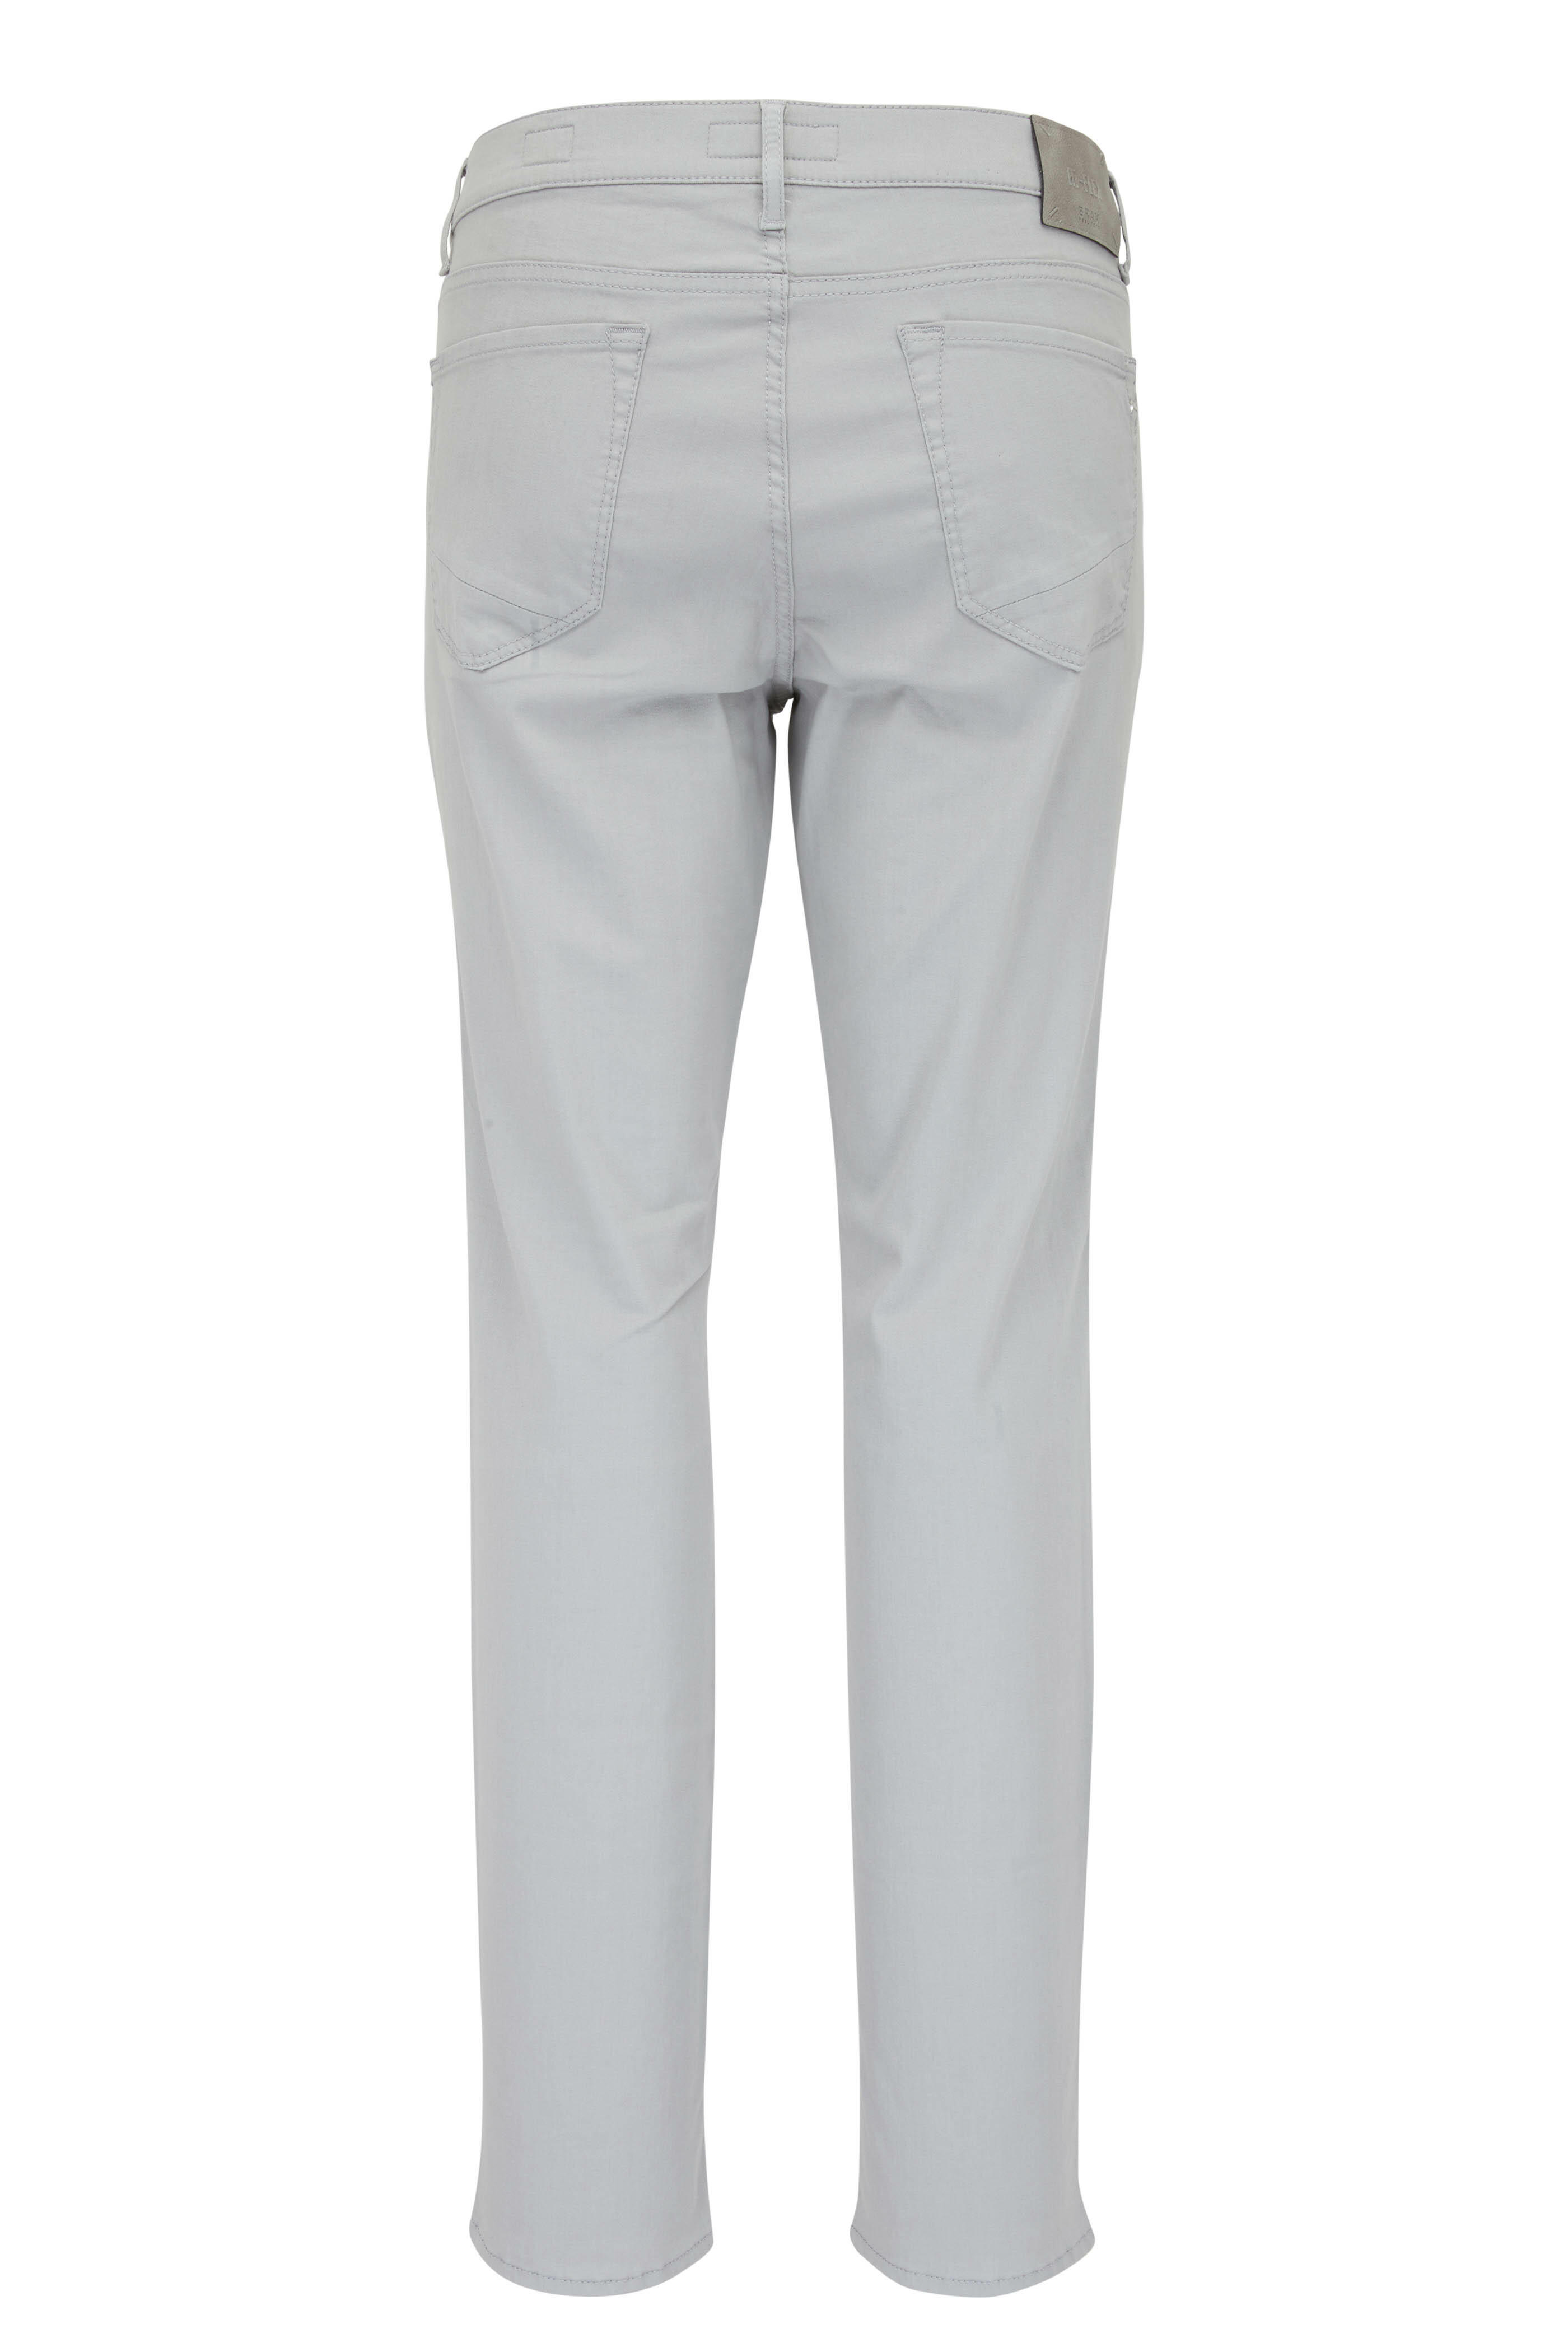 Brax - Chuck Silver Stretch Cotton Pant | Mitchell Stores